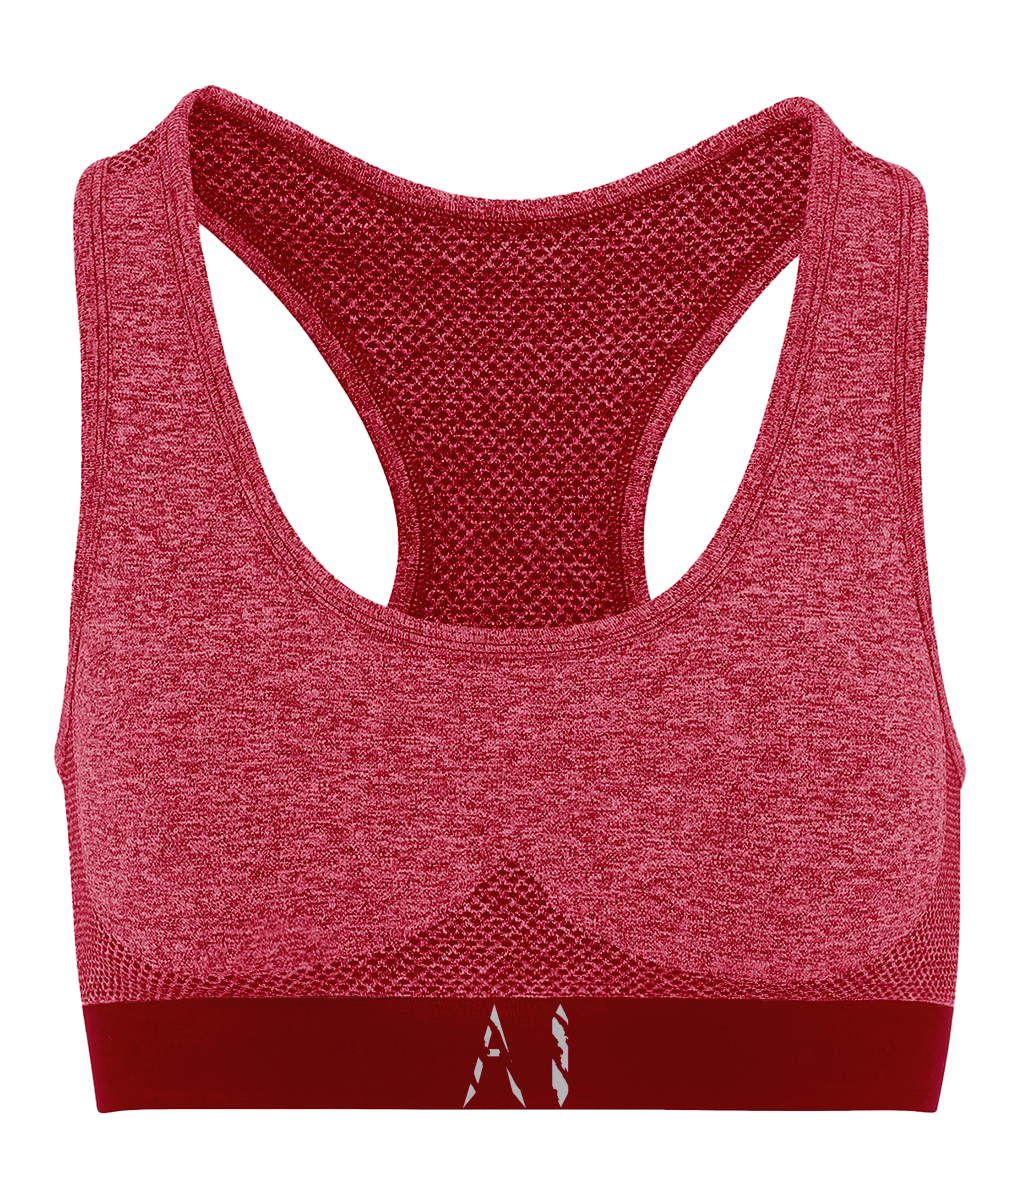 Womens Red Athletic Seamless Sports Bra with white AI logo on bottom strap